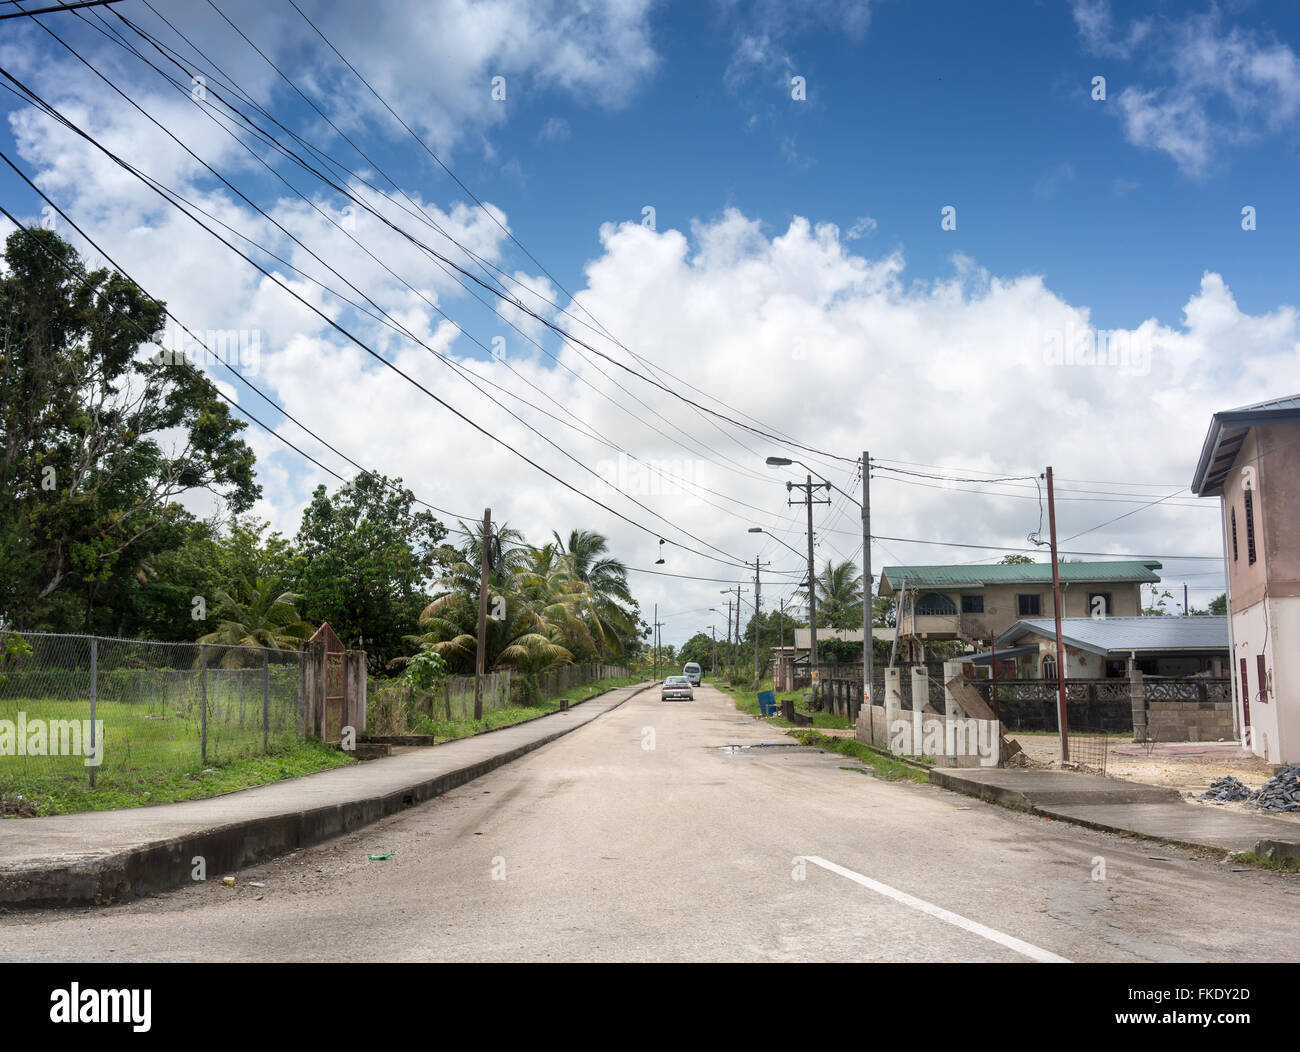 Cars on road along with houses against cloudy sky, Trinidad, Trinidad And Tobago Stock Photo